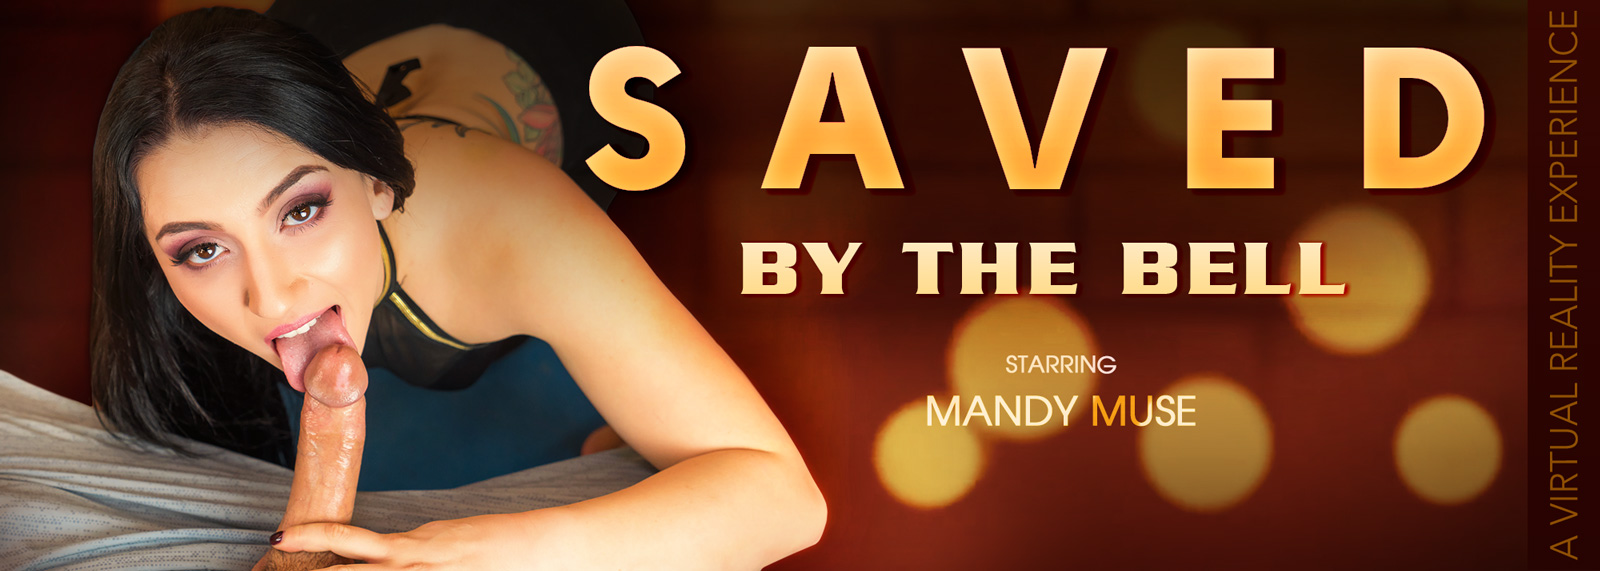 Saved by the Bell with Mandy Muse  Slideshow